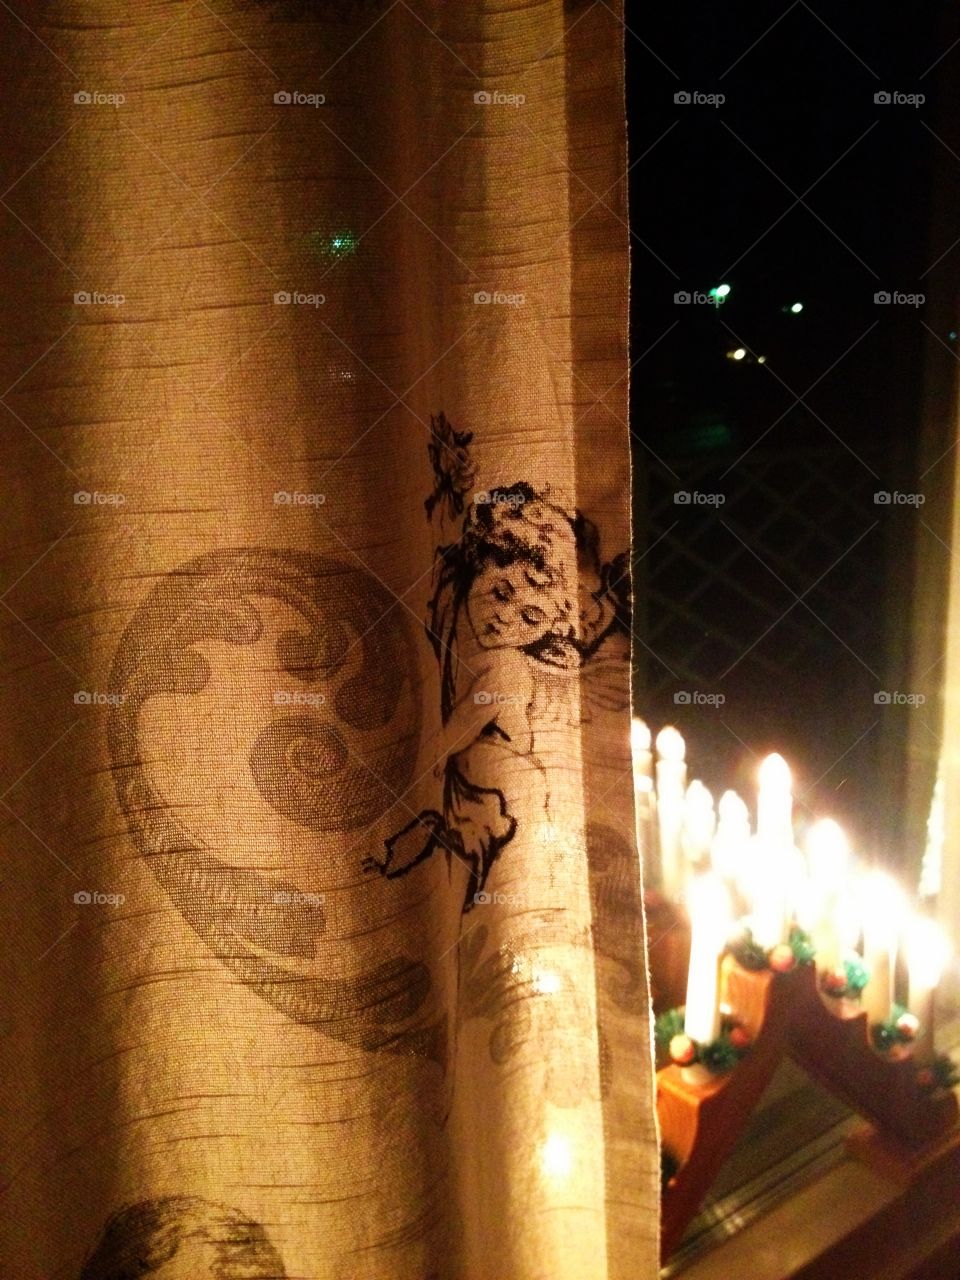 When the angels fall. White curtain with angel print, window and candles